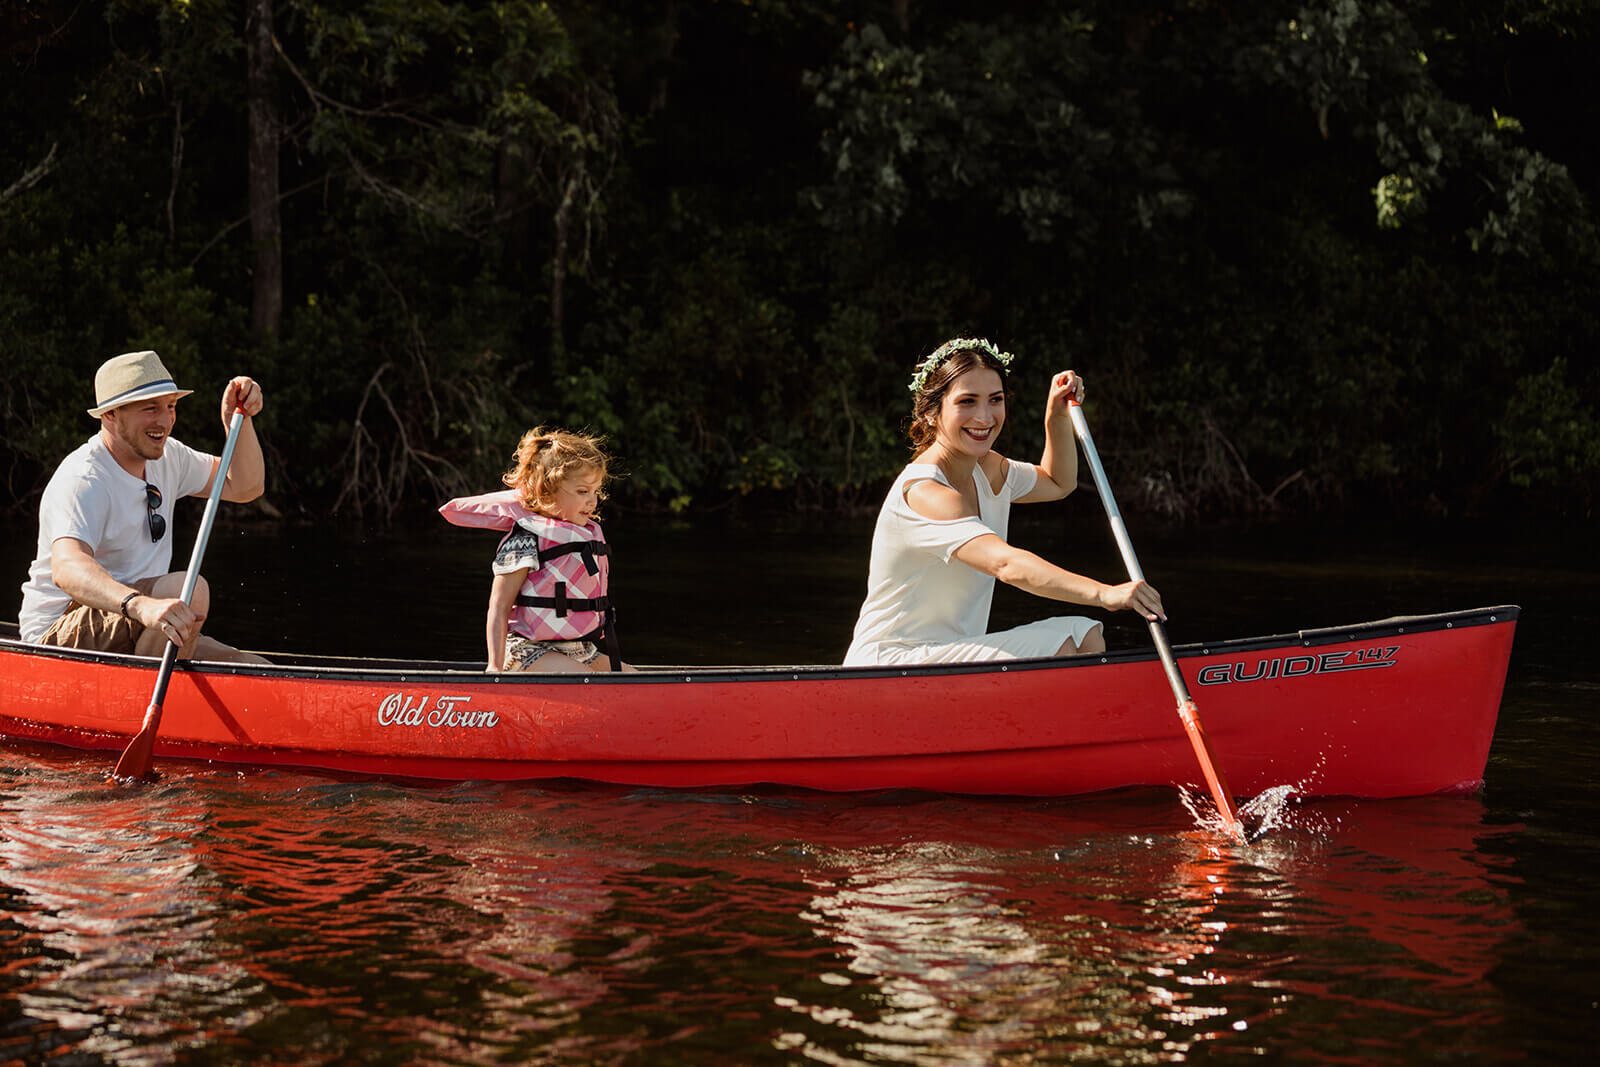  Canoeing Rhode Island Elopement on the Wood River 